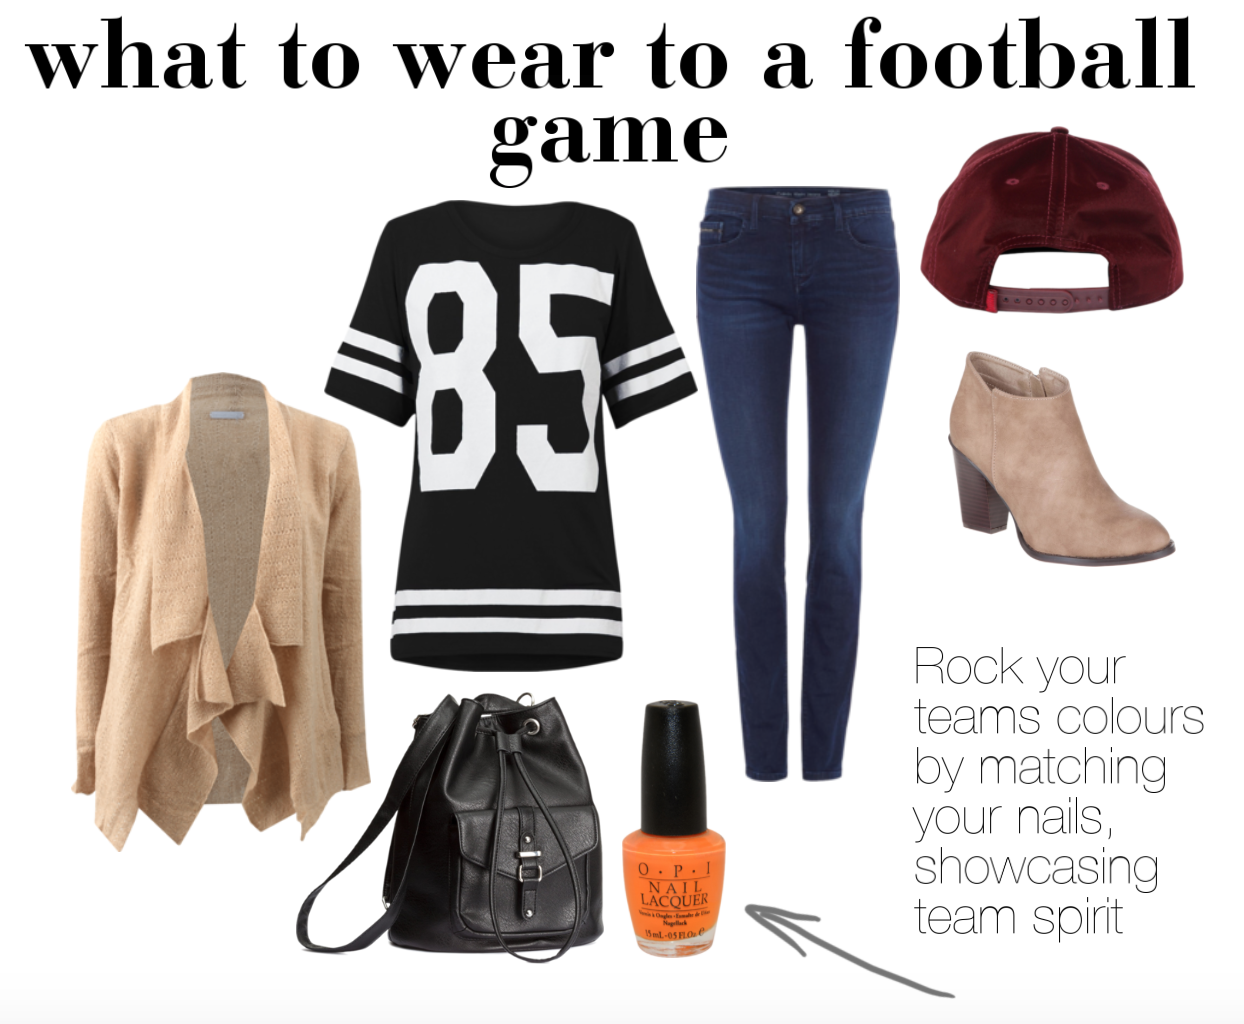 The Girlfriends Guide to Football